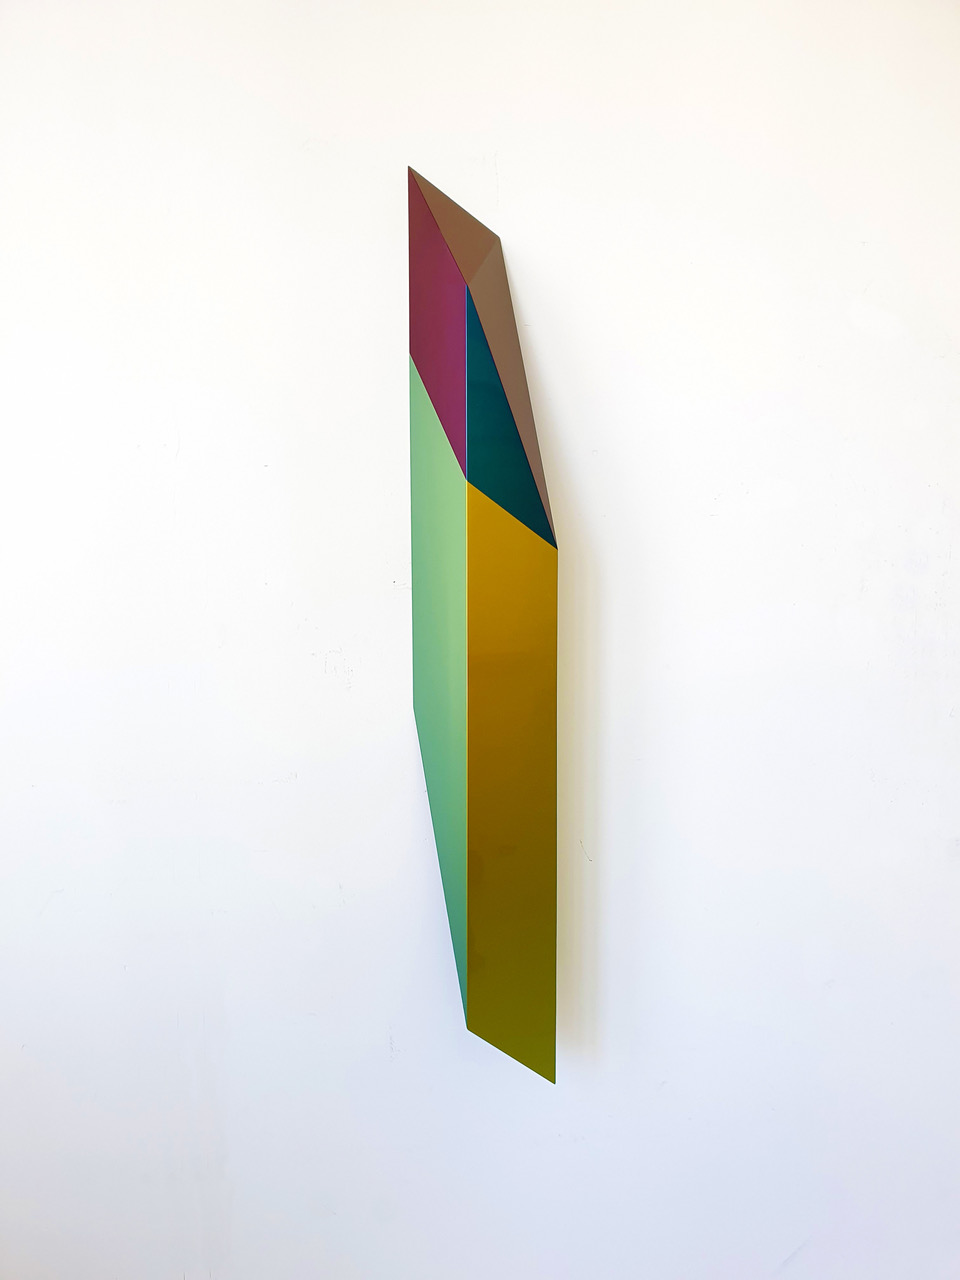 Hanna Roeckle, Crystalline Needle B, 2021
Lacquer on SWISSCDF
140 x 23,8 x 13,7 cm
